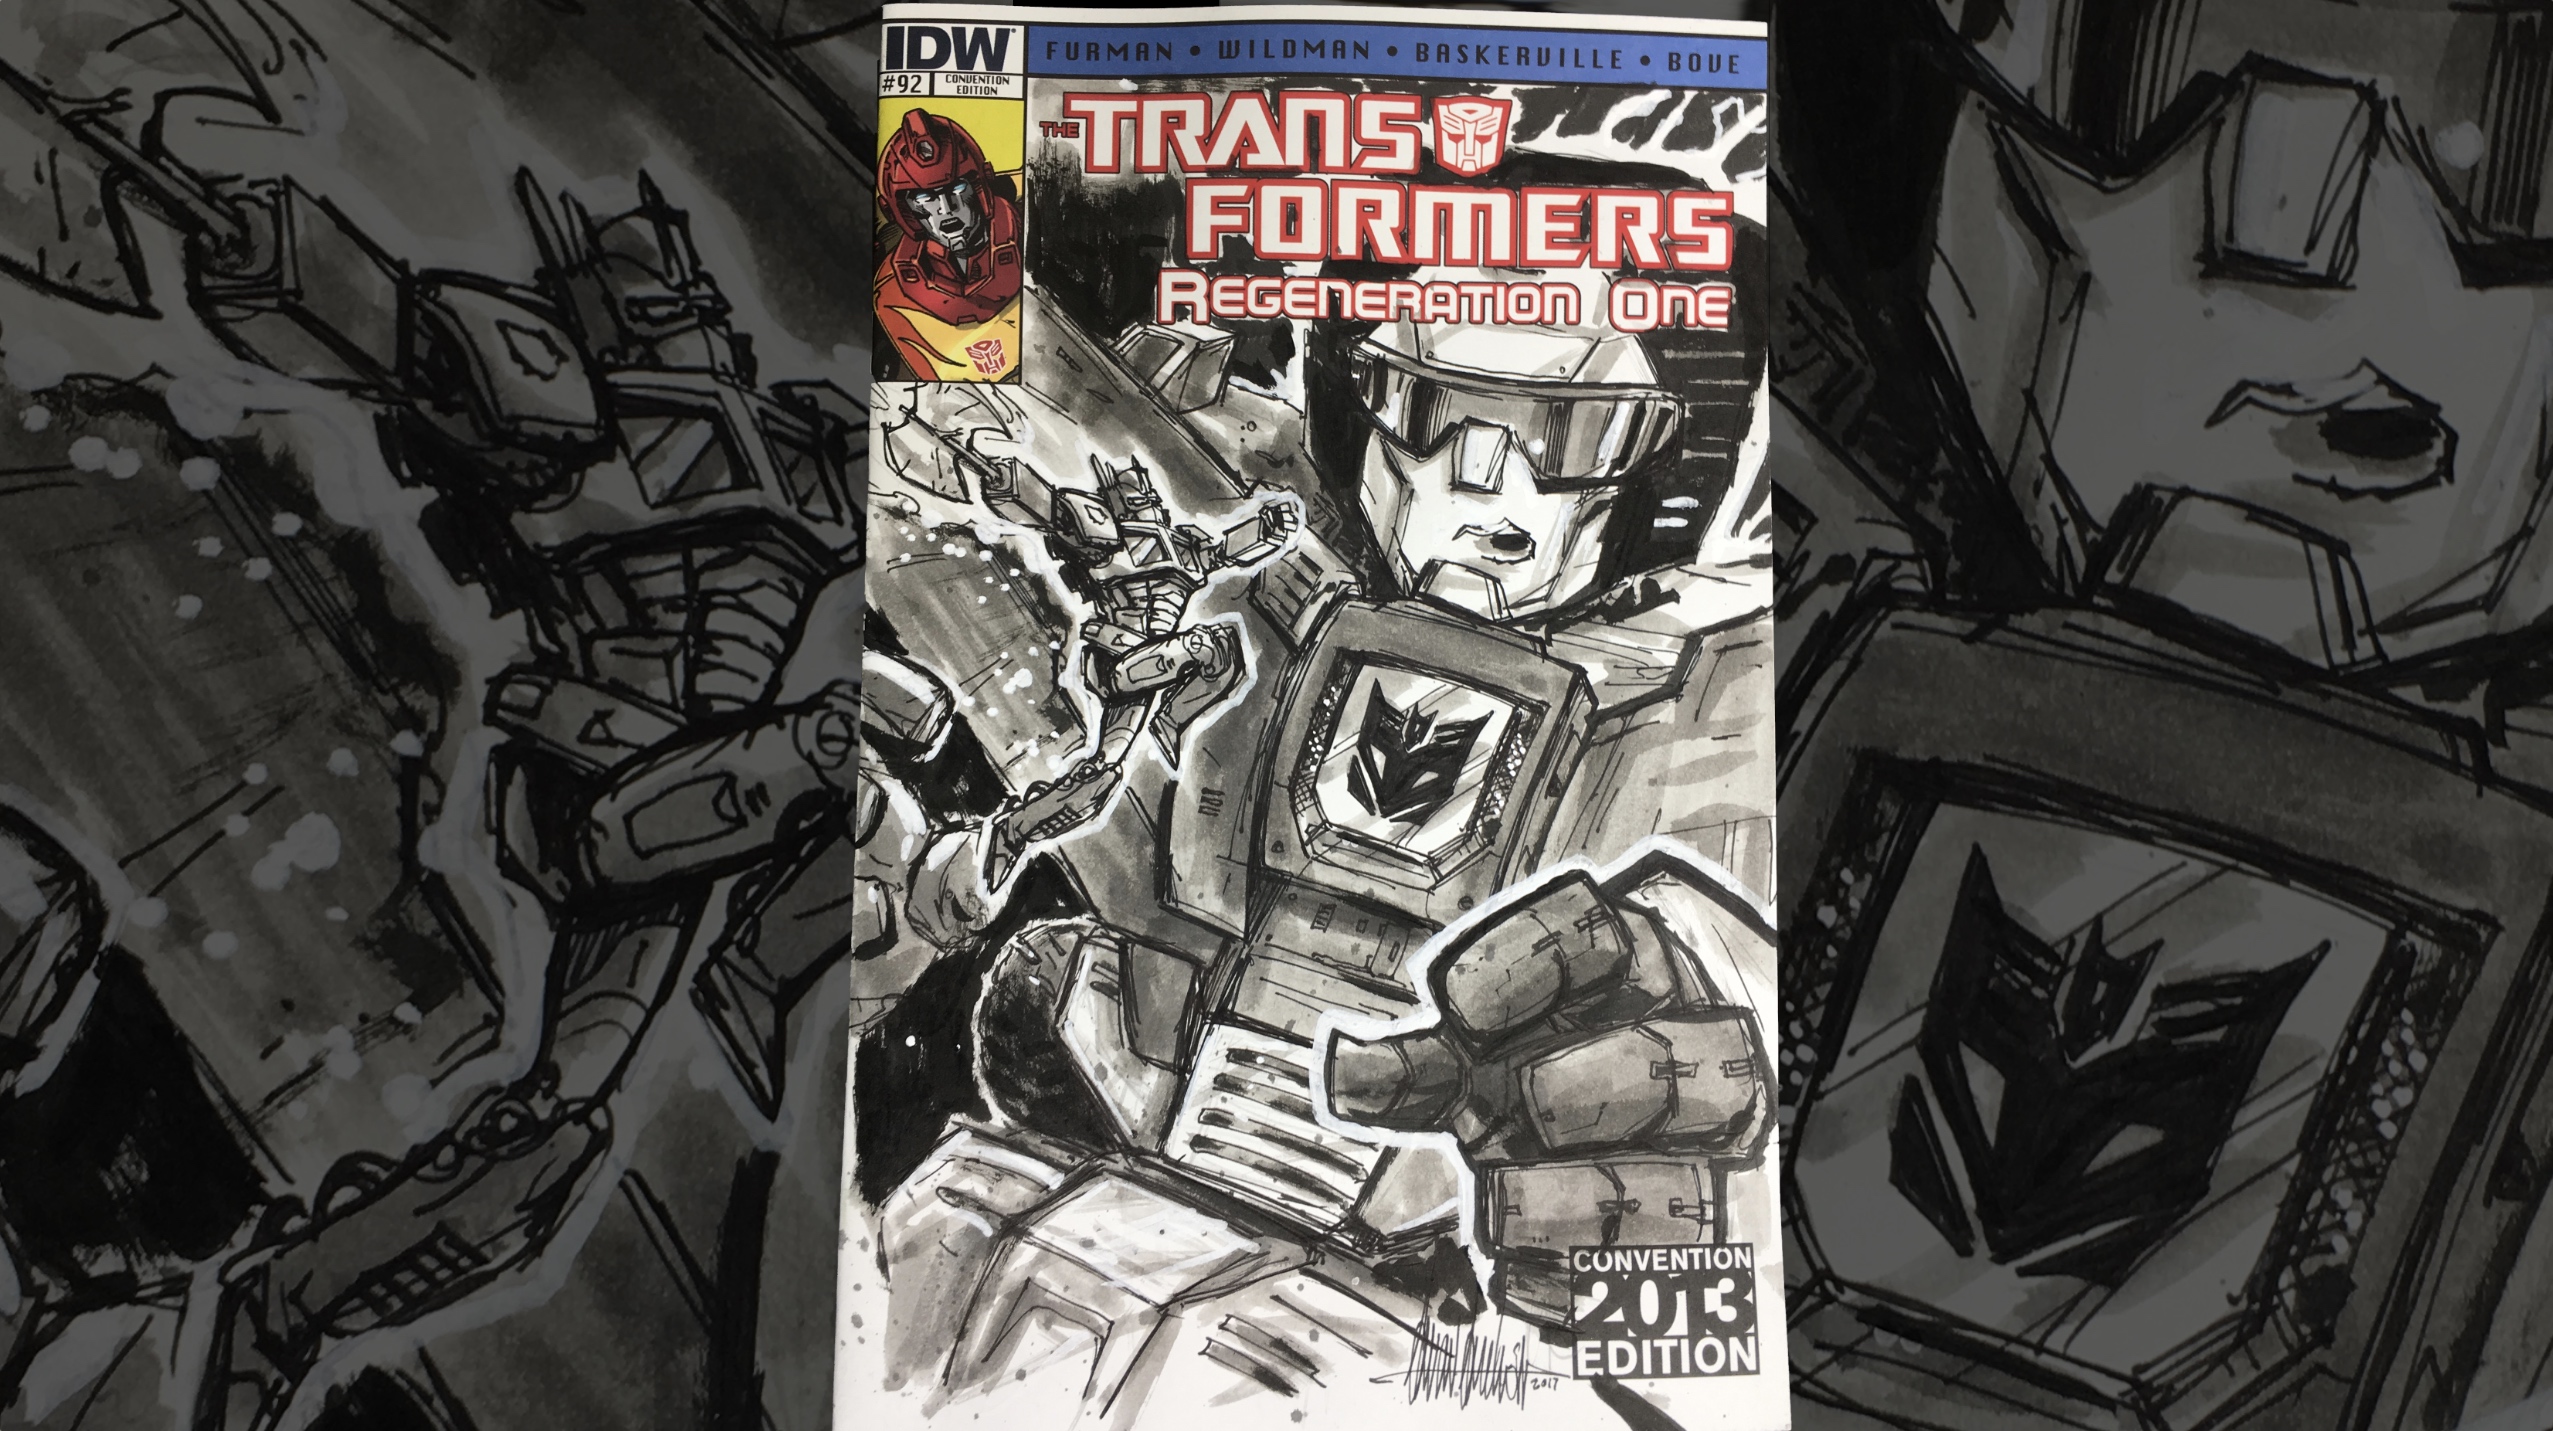 Sketch Covers With Aaron Archer | Transformers Devastation Homage